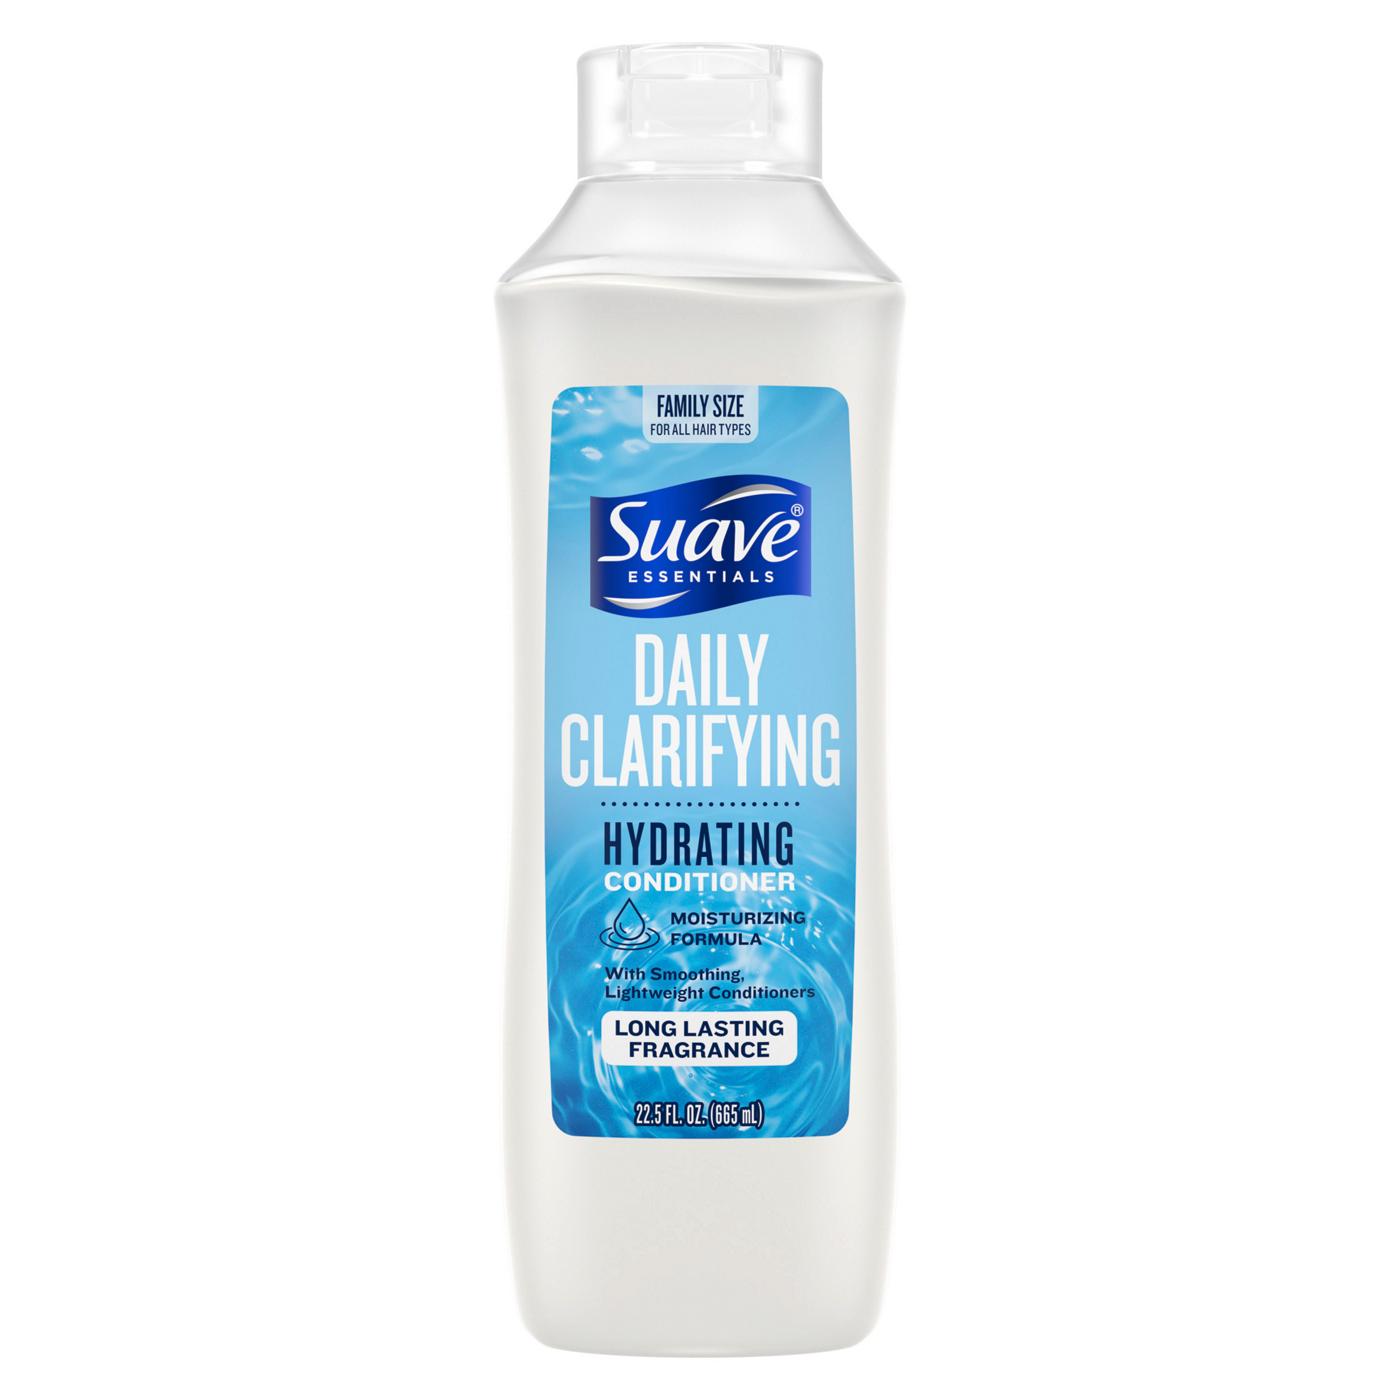 Suave Essentials Cleansing Conditioner - Daily Clarifying; image 5 of 5